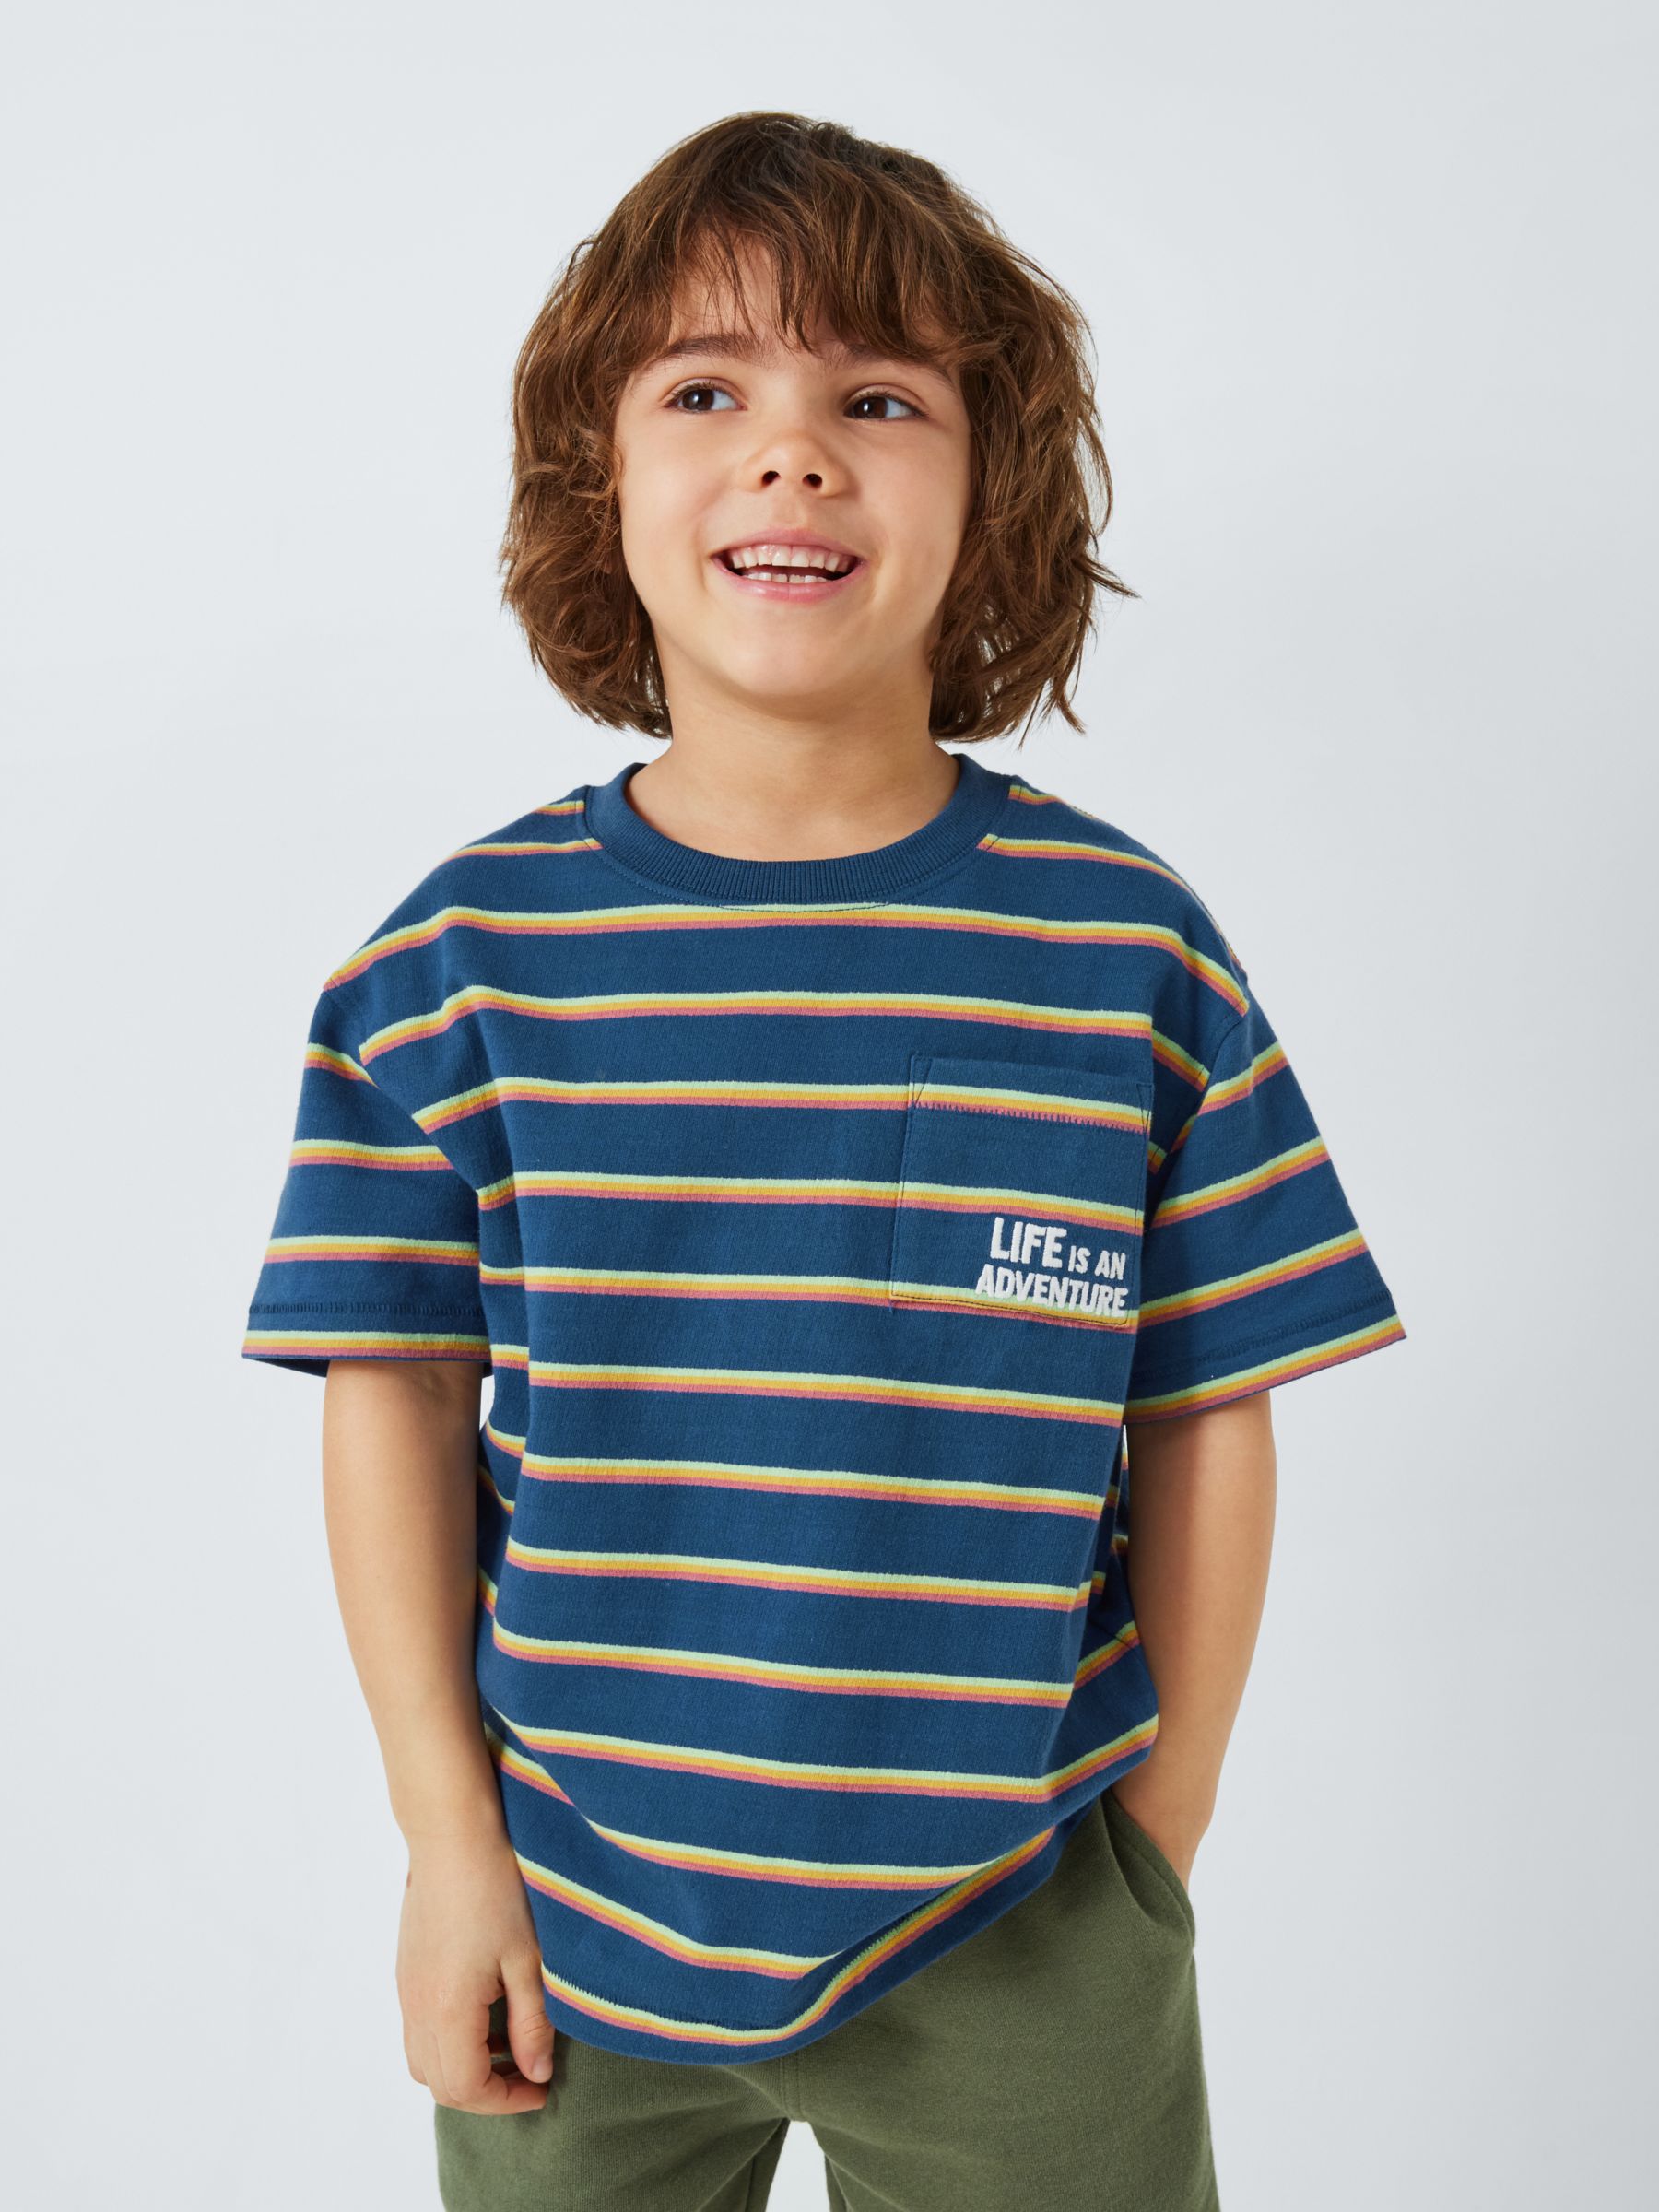 John Lewis Kids' Embroidered Graphic Life Is An Adventure Stripe T-Shirt, Blue, 10 years